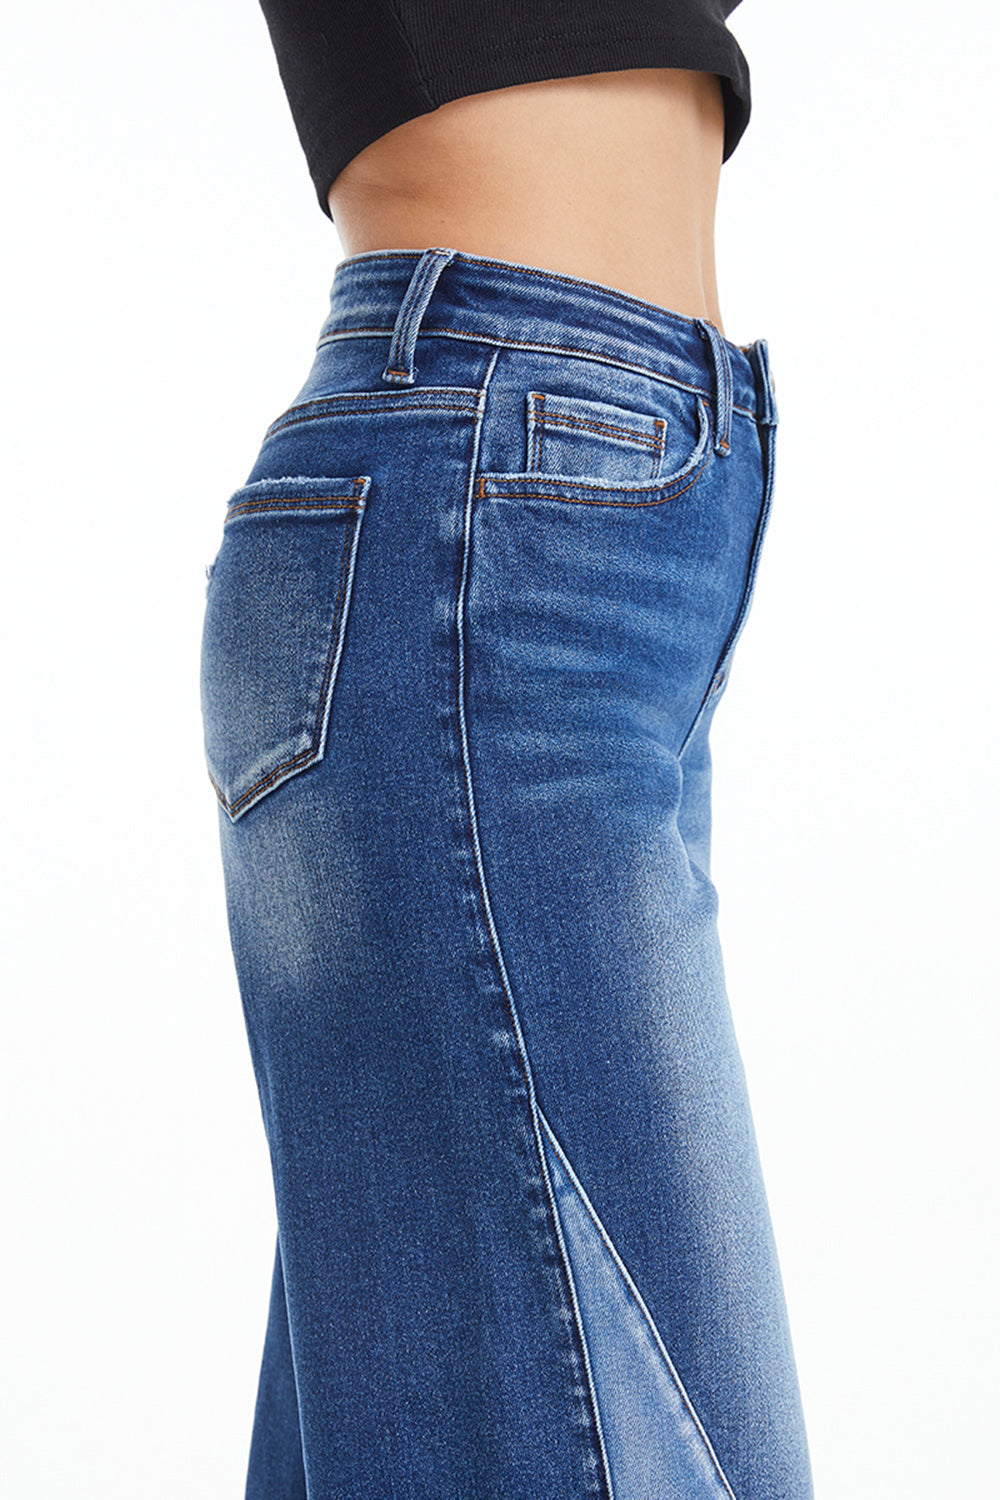 BAYEAS Full Size High Waist Two-Tones Patched Wide Leg Jeans - AllIn Computer